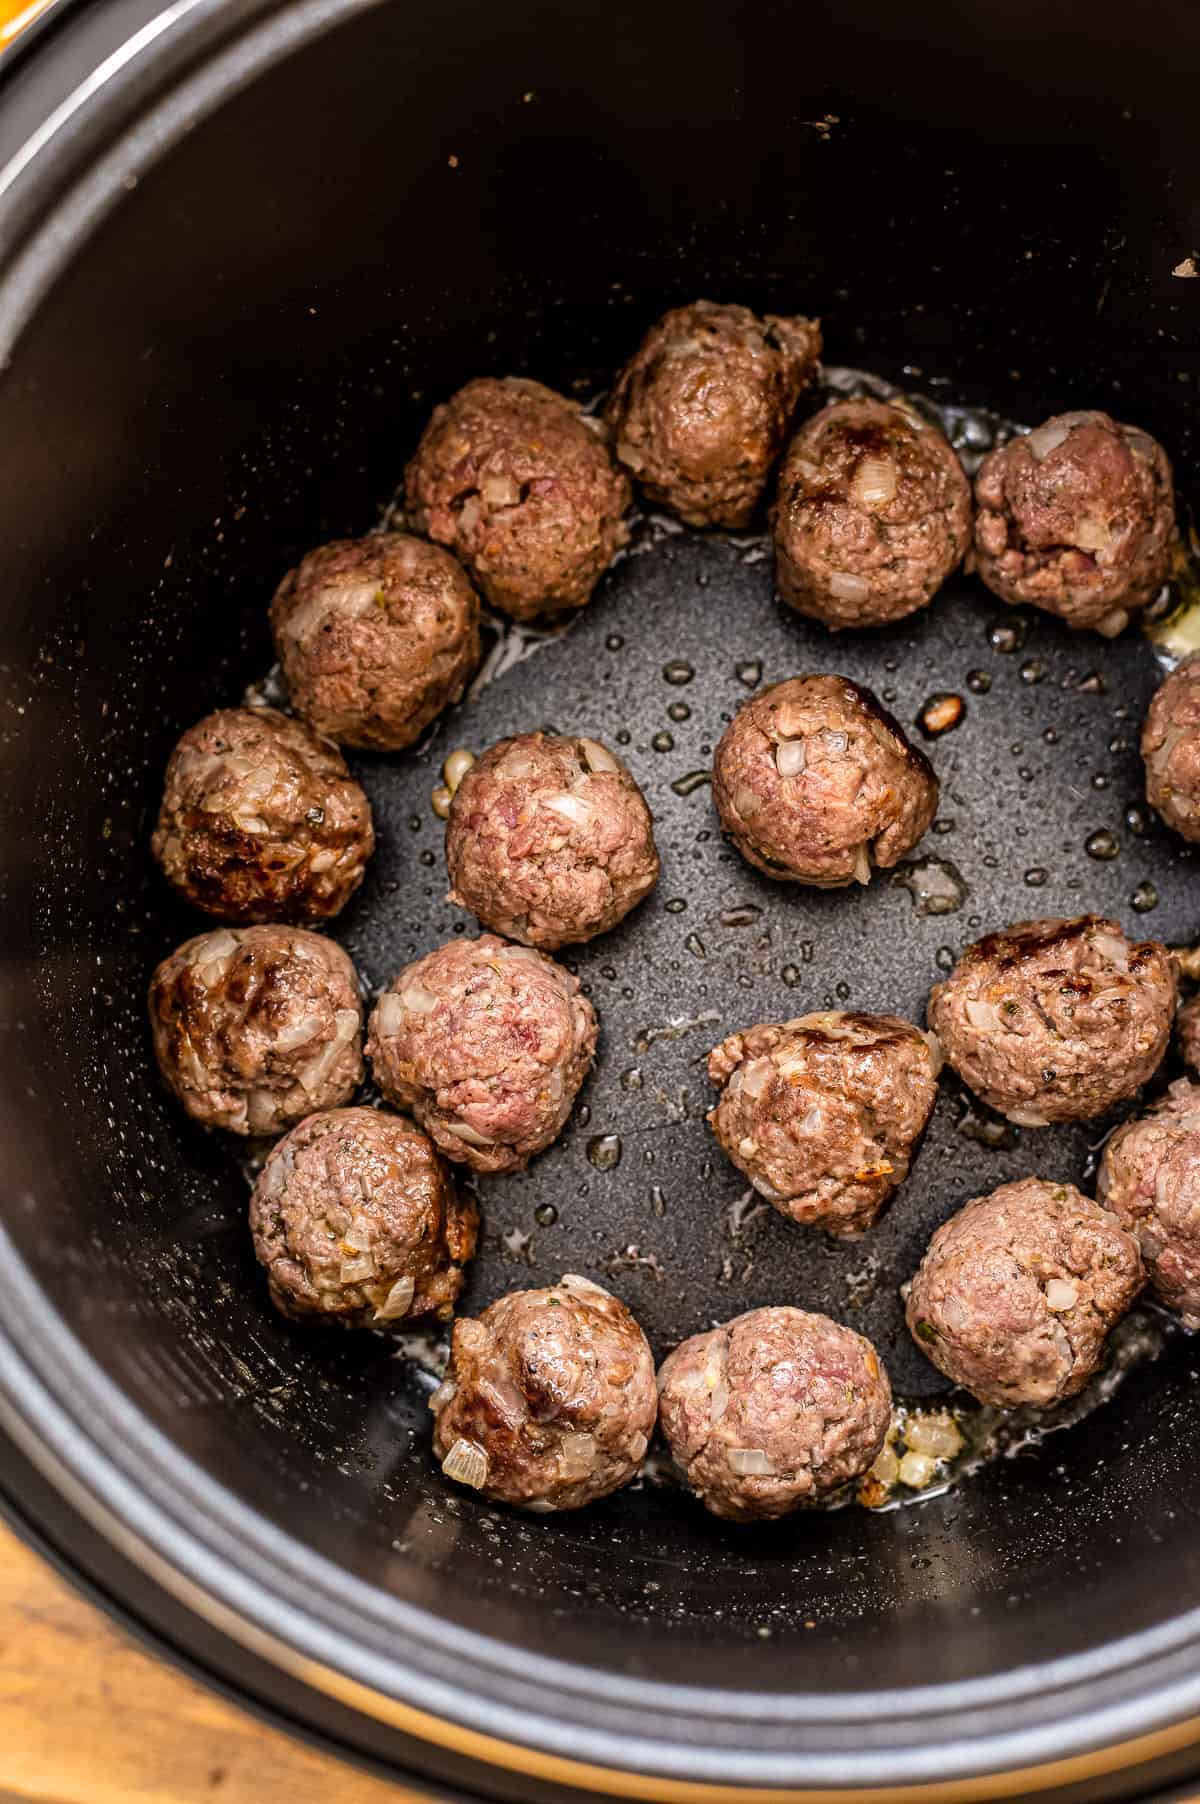 Instant Pot with browned meatballs in it.